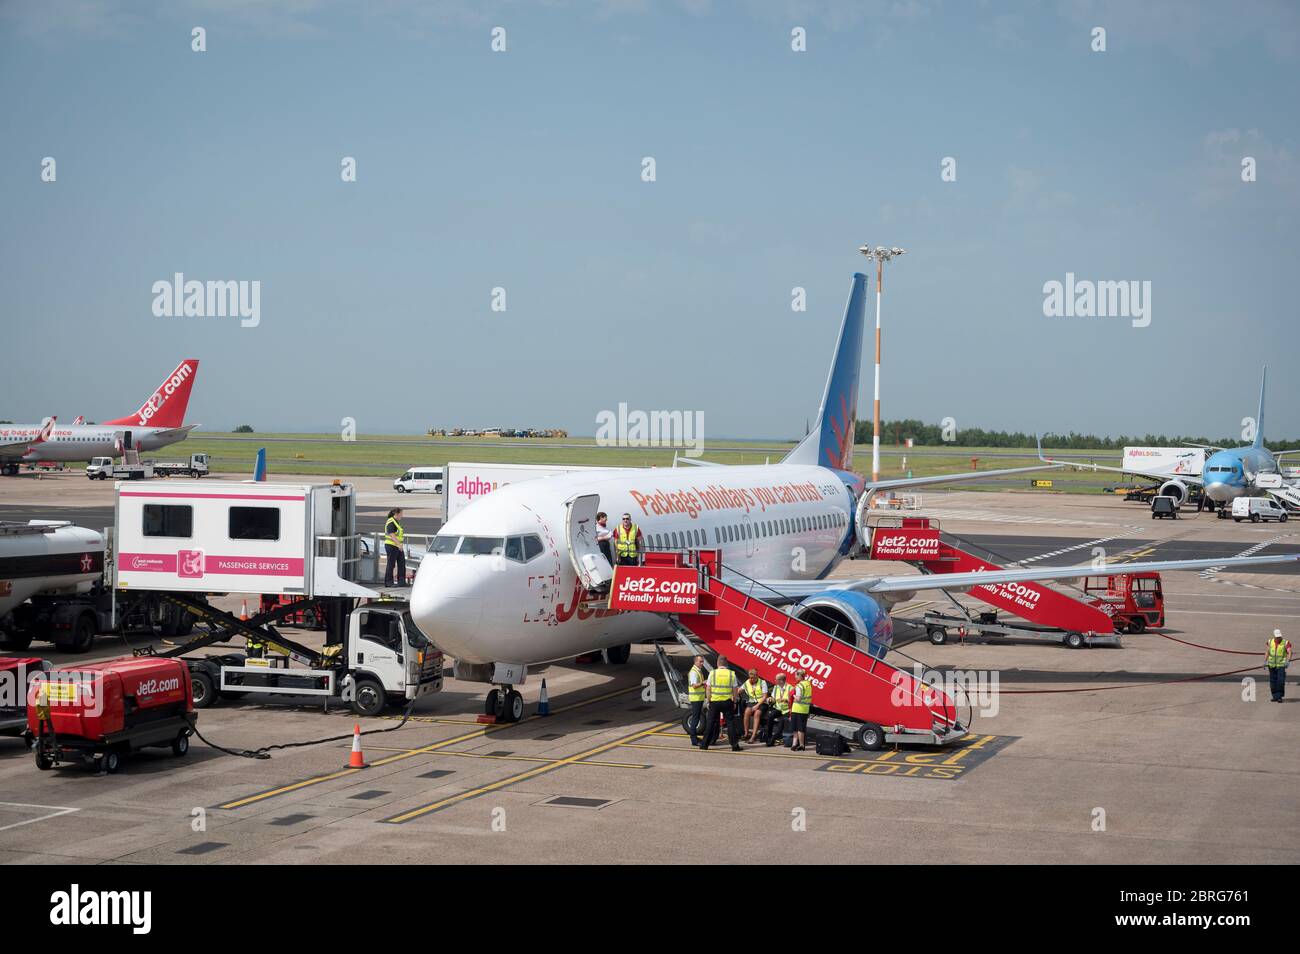 Jet 2 Boeing 737 aeoplane waiting on the apron at East Midlands Airport, Leicestershire, England. Stock Photo